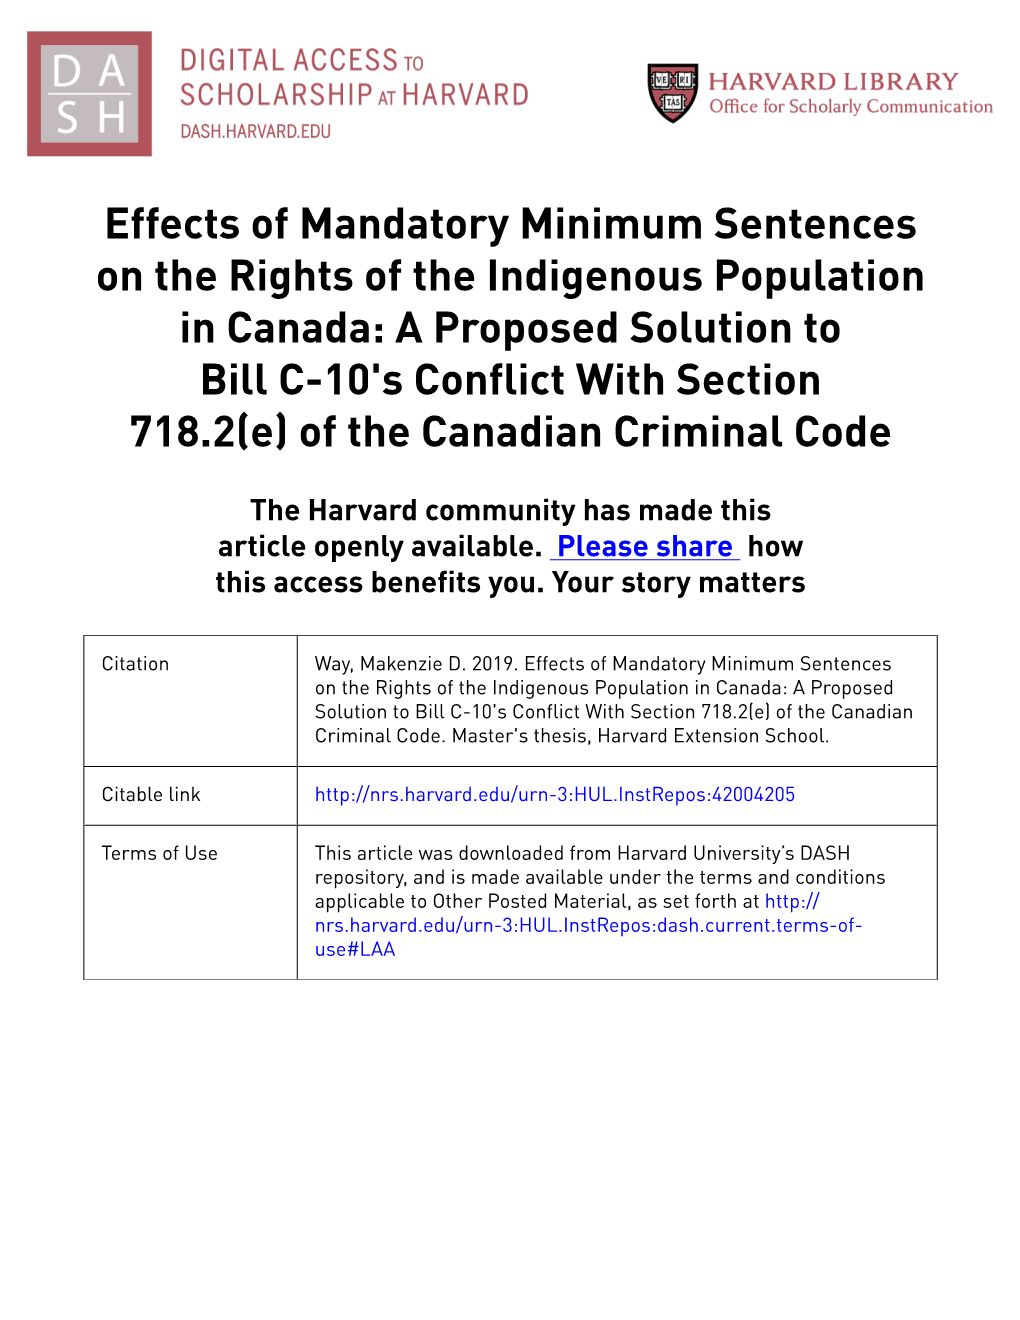 Effects of Mandatory Minimum Sentences on the Rights of The